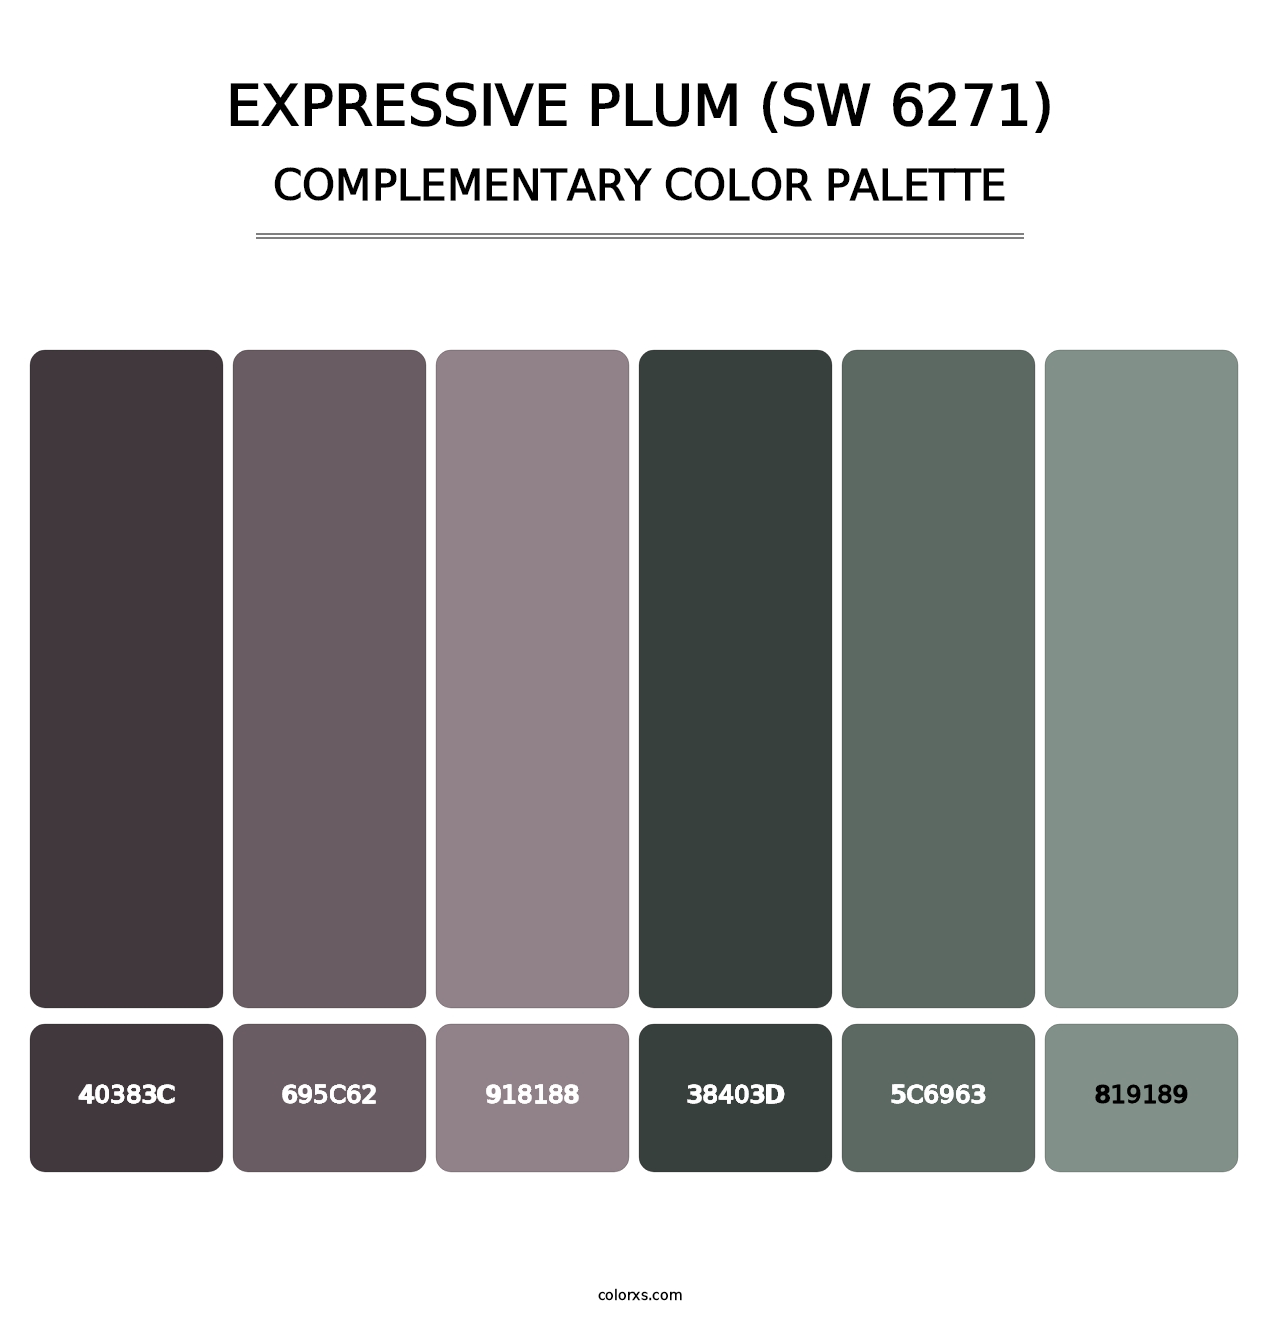 Expressive Plum (SW 6271) - Complementary Color Palette